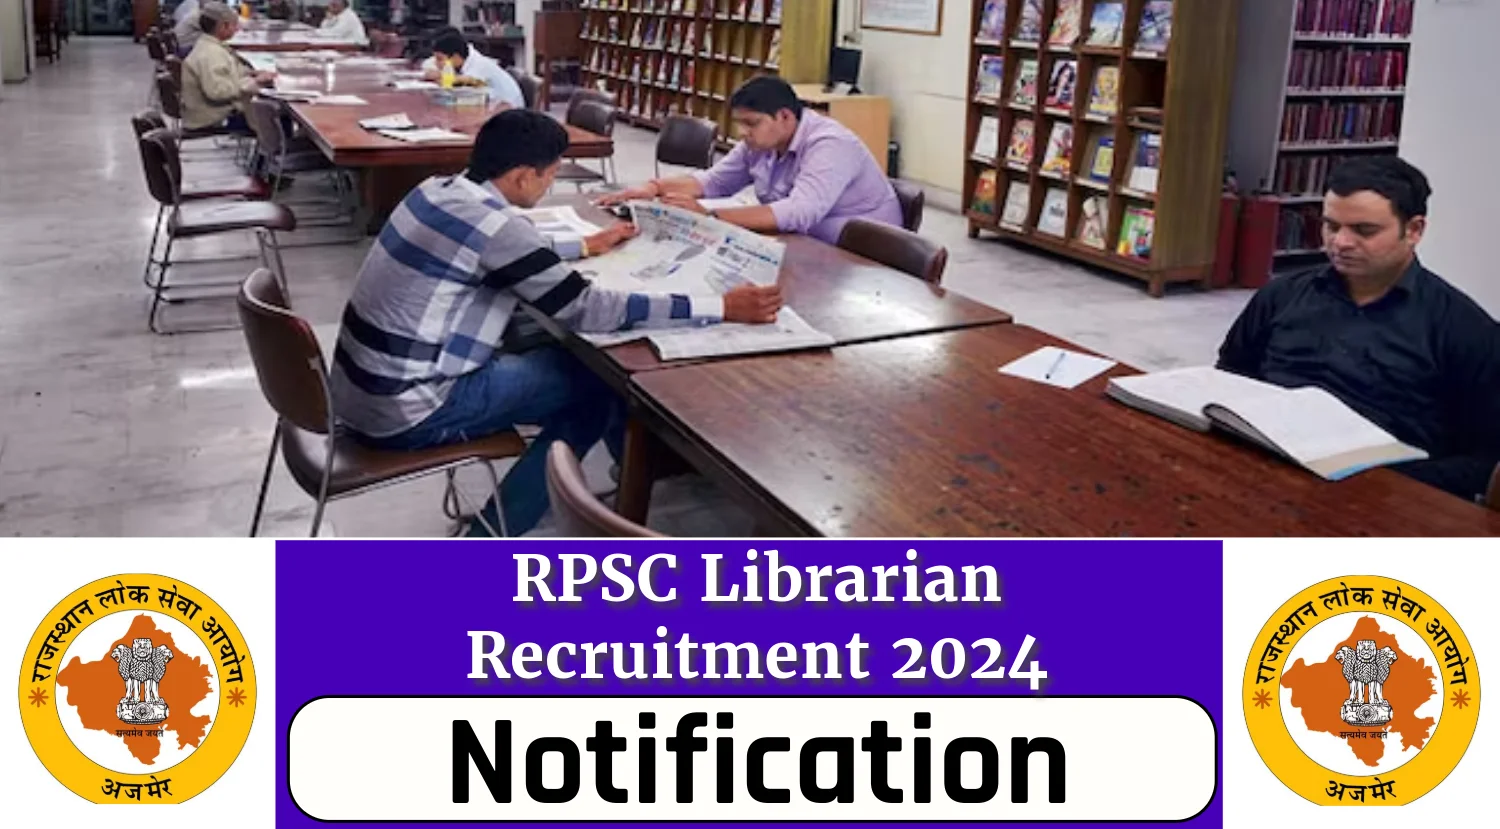 RPSC Librarian Recruitment 2024 Notification Out for 300 Pos